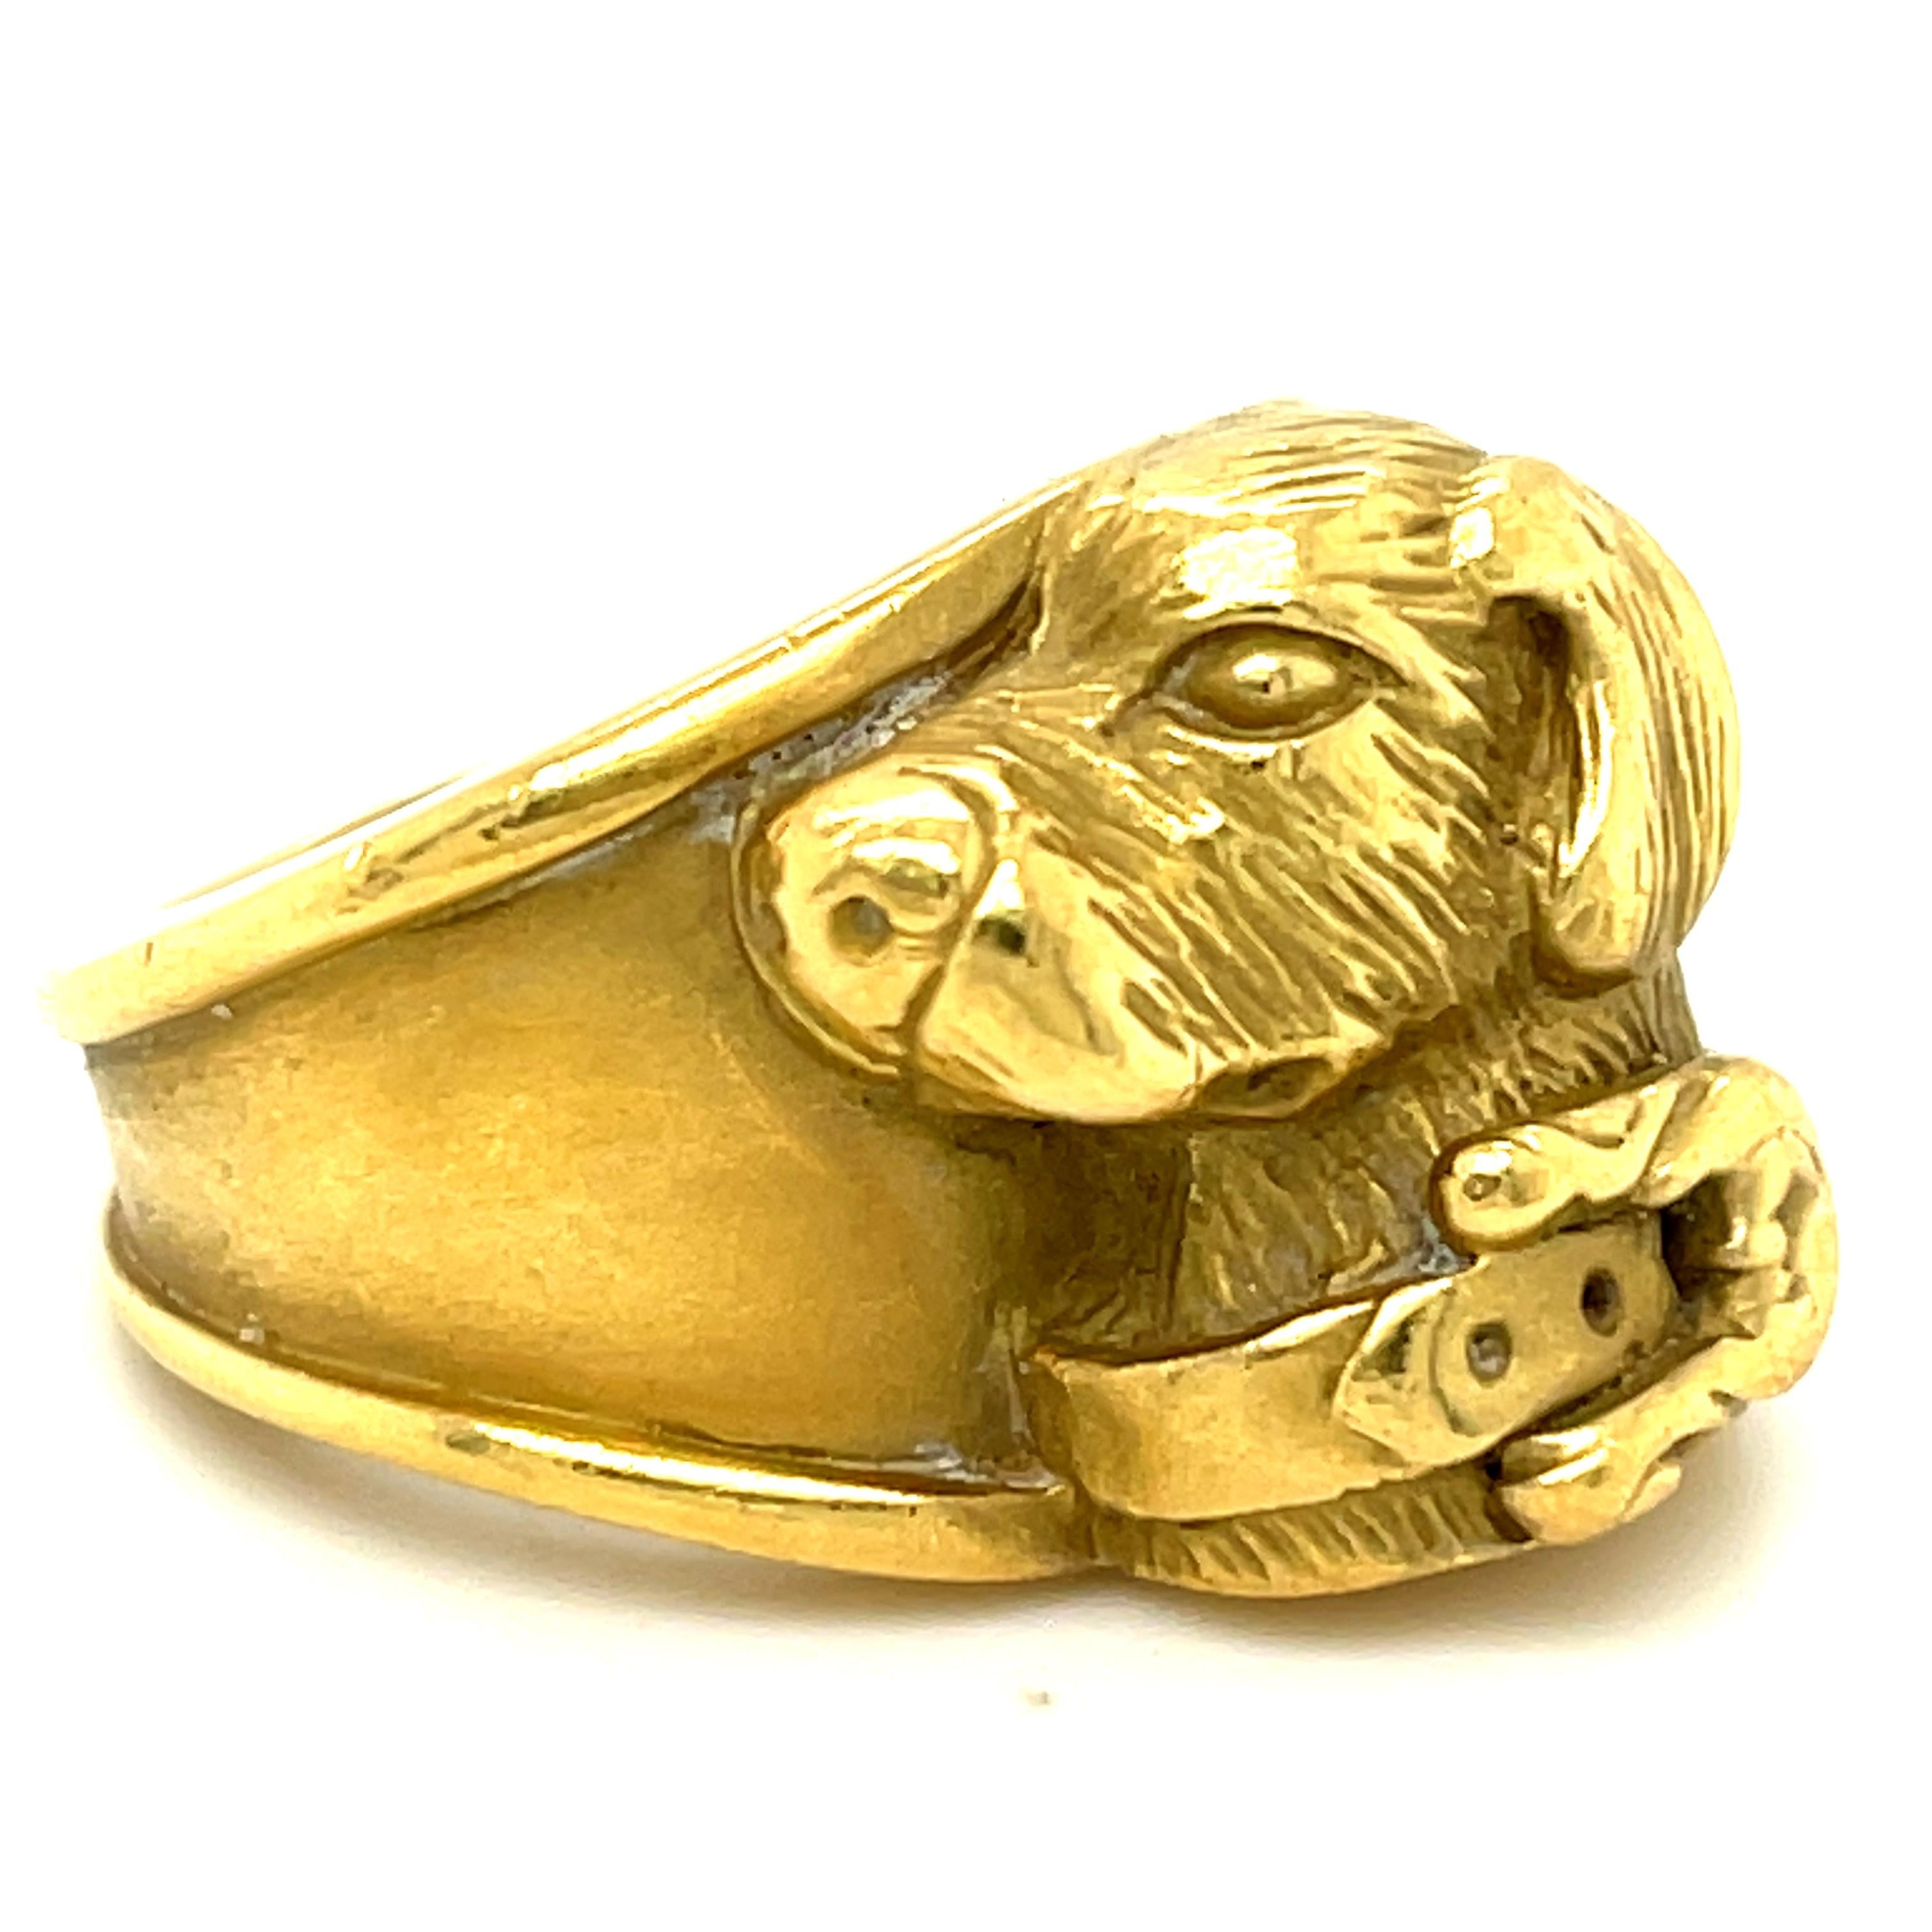 Modern Vintage 18 Karat Yellow Gold Canine Ring by Keiselstein-Cord